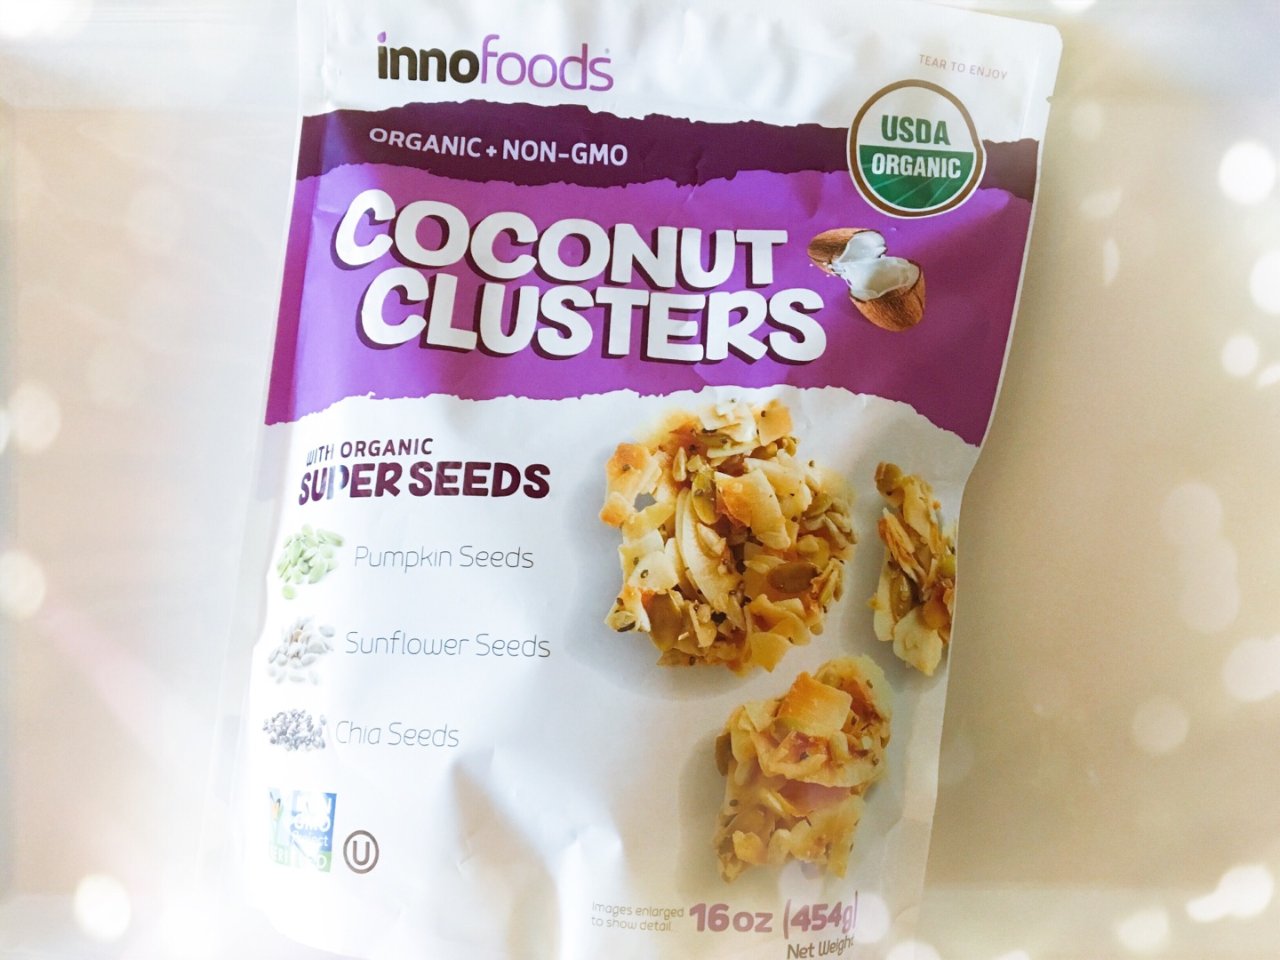 Innofoods,Organic Coconut Clusters with Super Seeds,有机南瓜奇亚籽椰子脆块,Costco